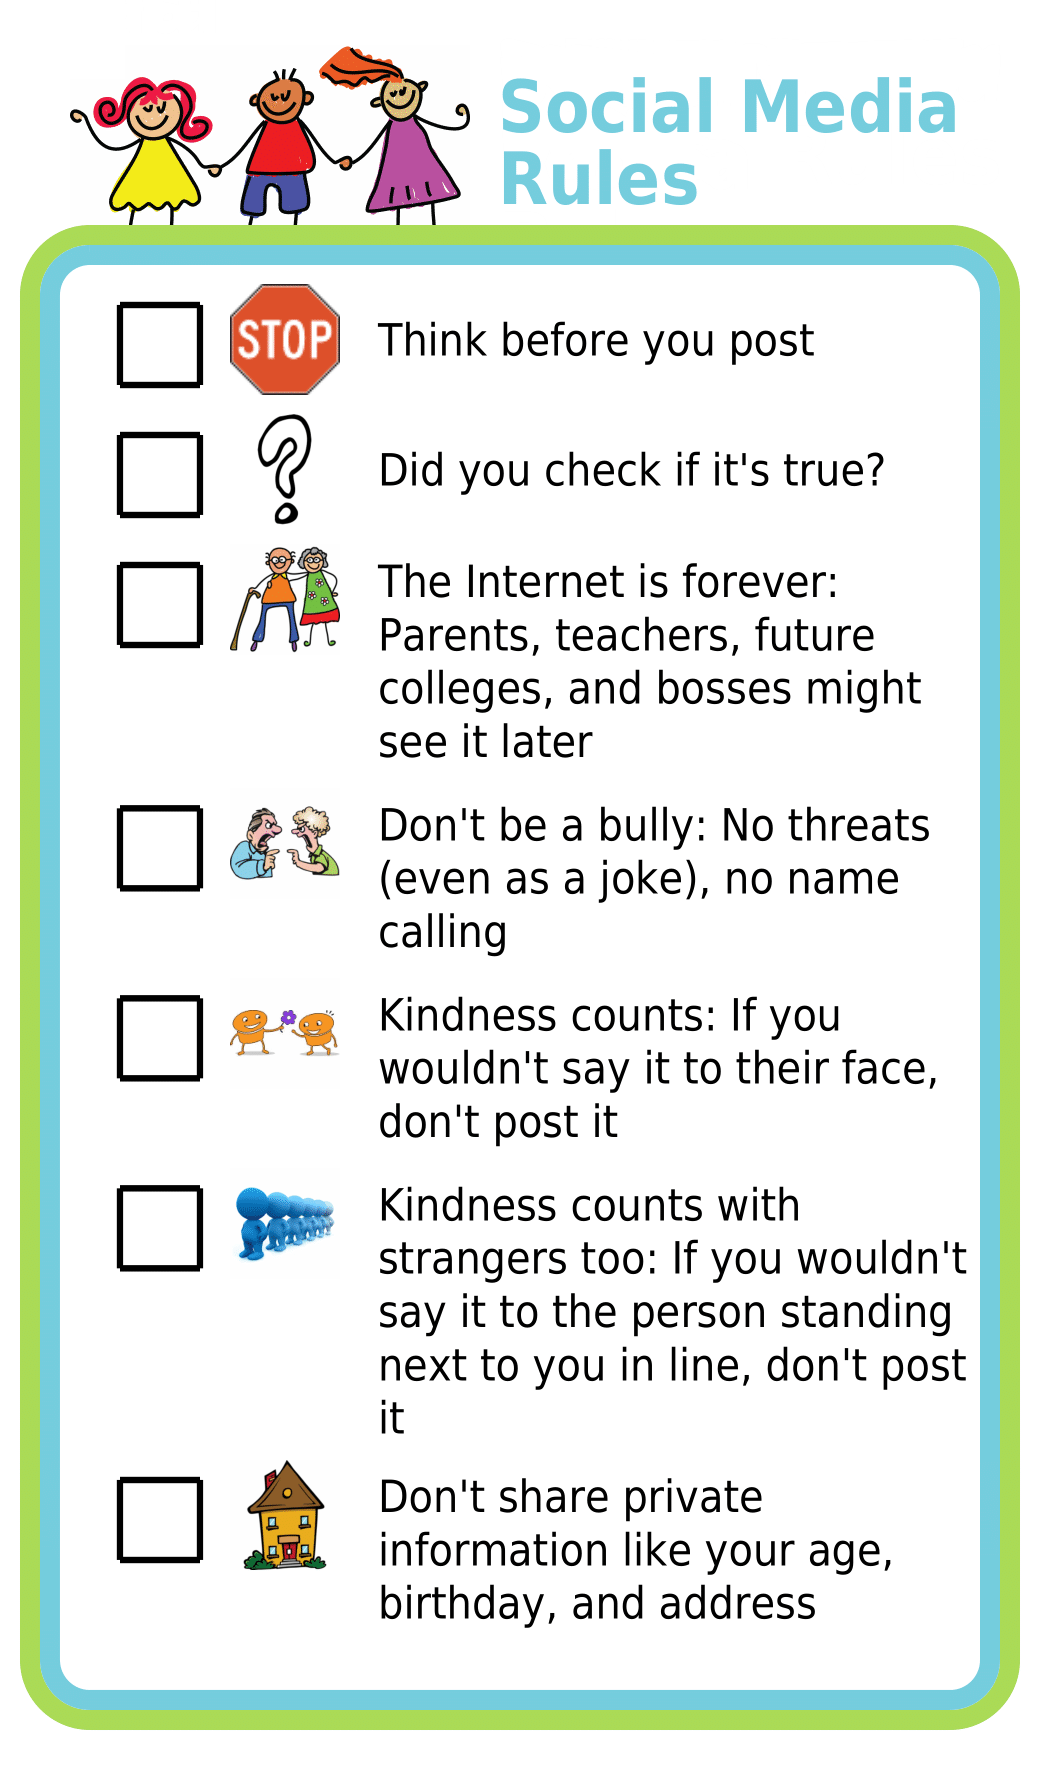 Picture checklist showing social media rules